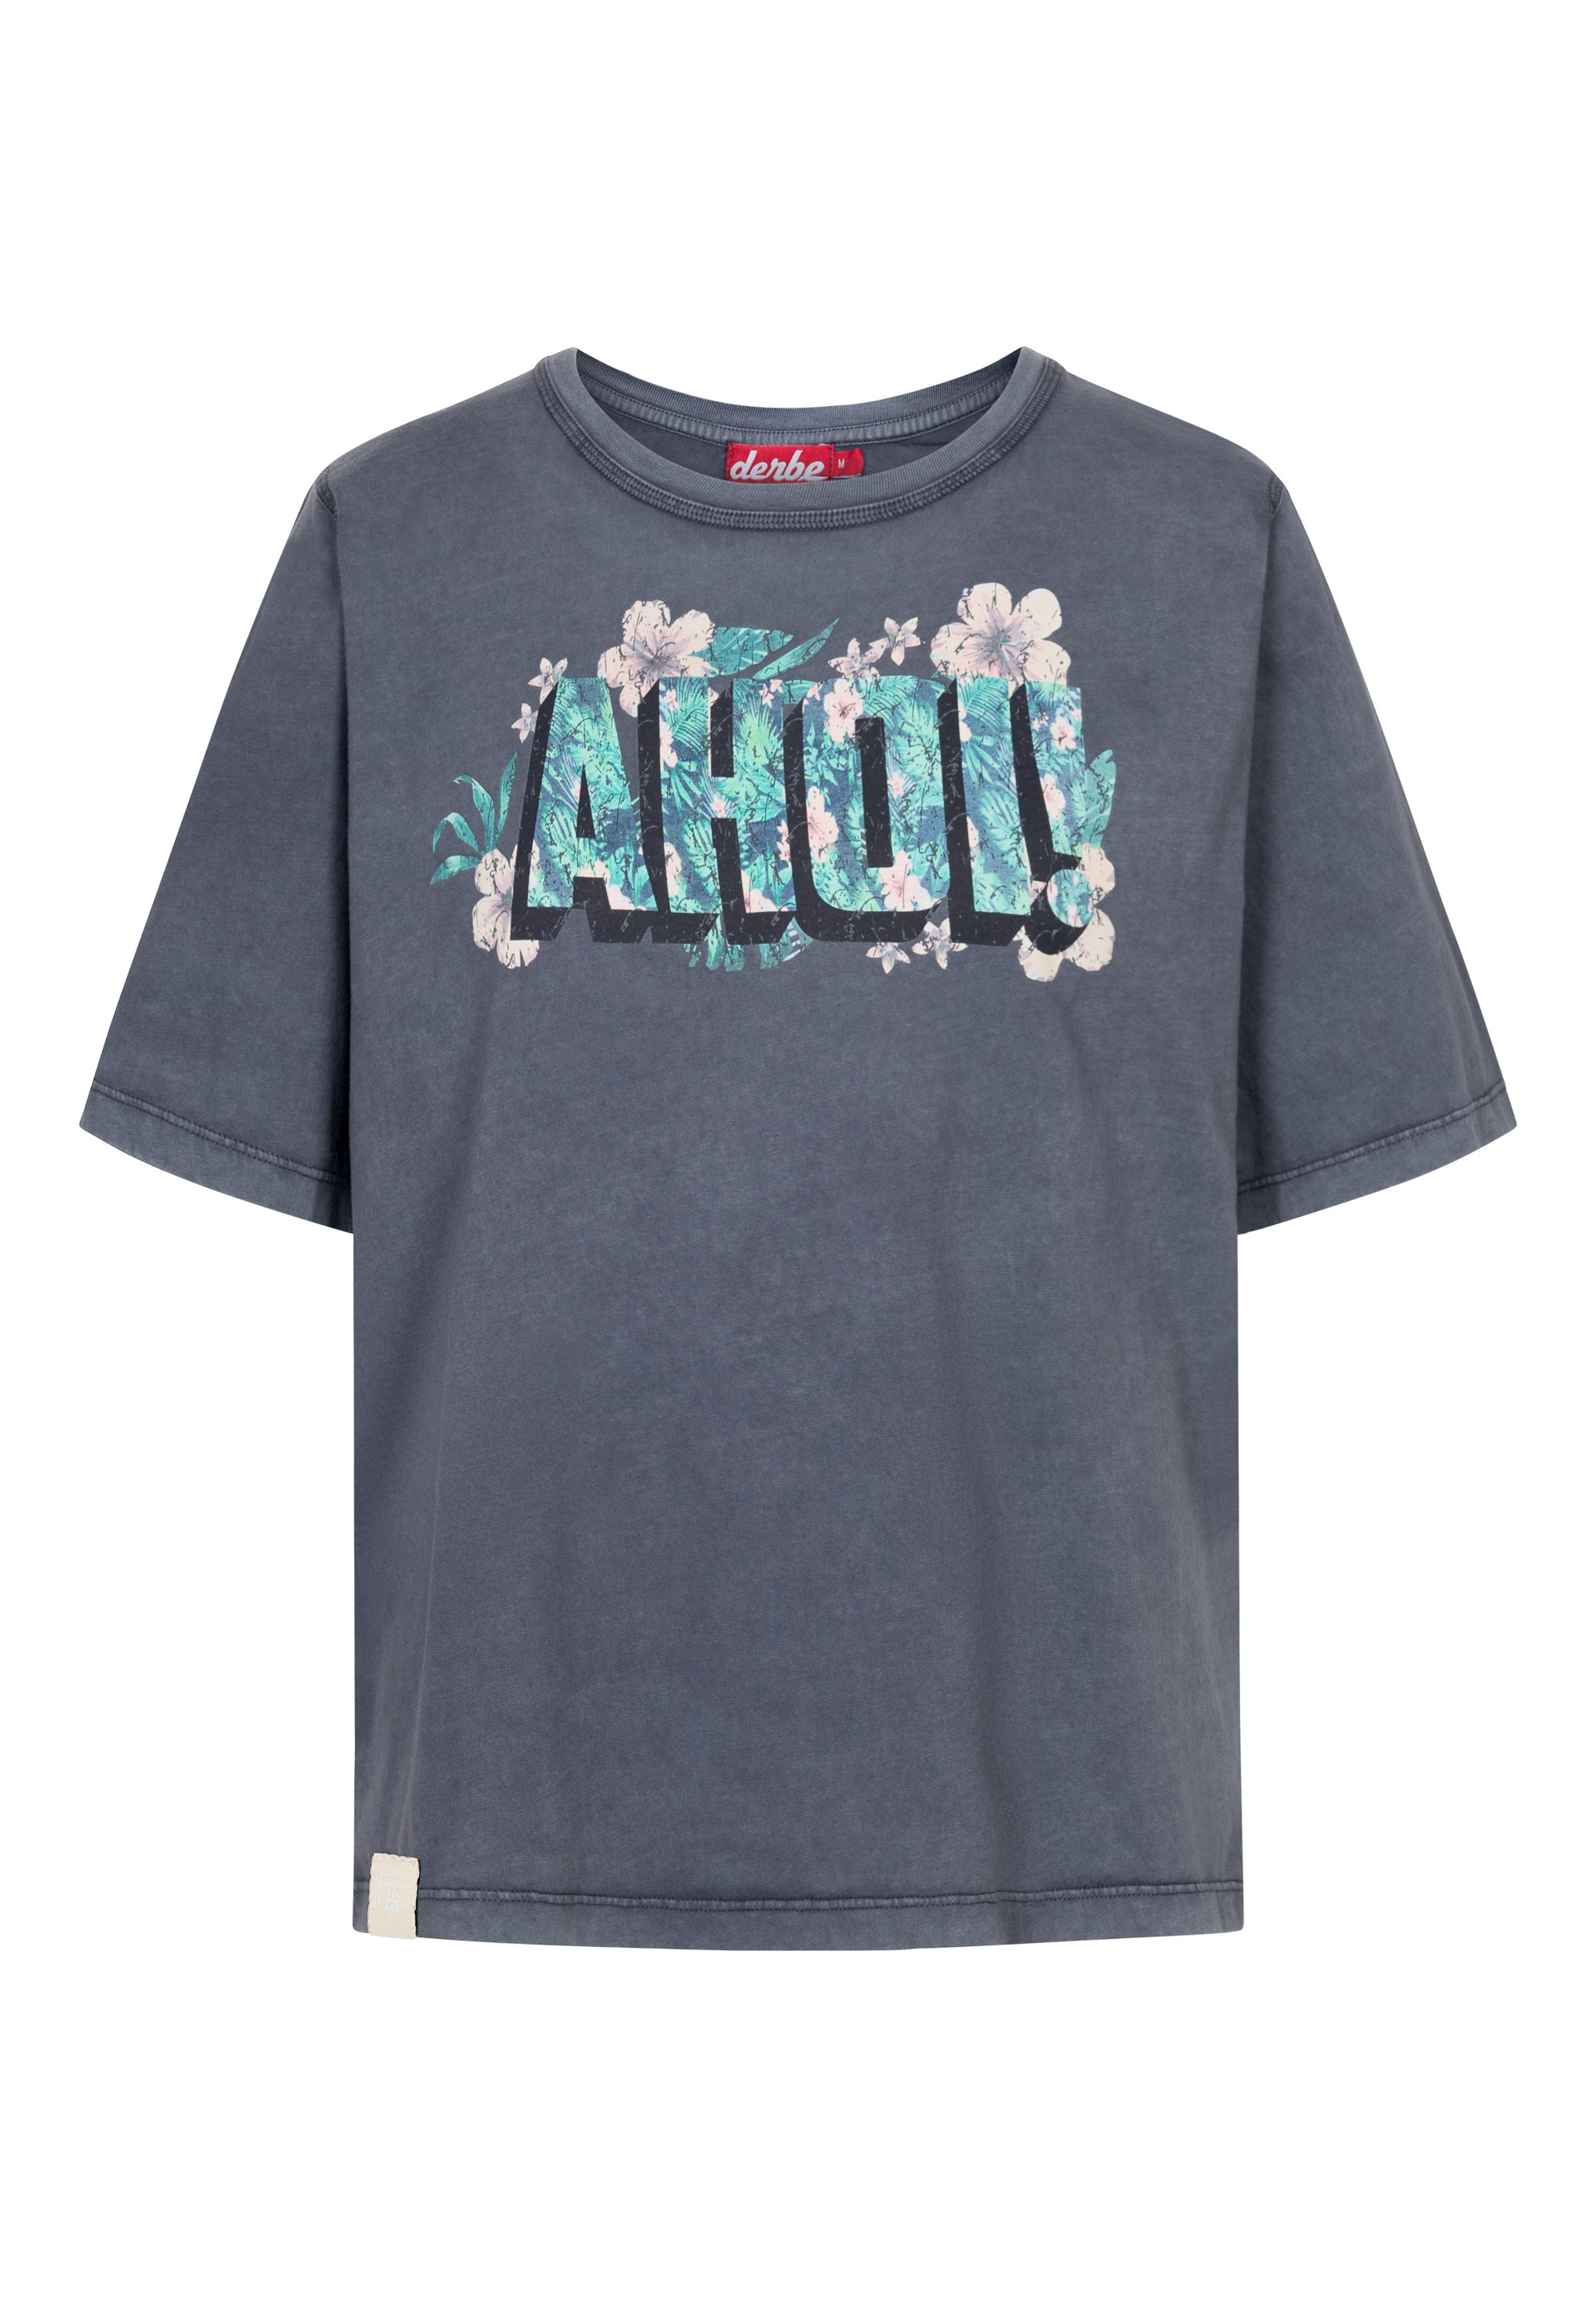 in »Hawahoi«, Fabric T-Shirt Portugal, washed online Derbe Baumwolle, Made